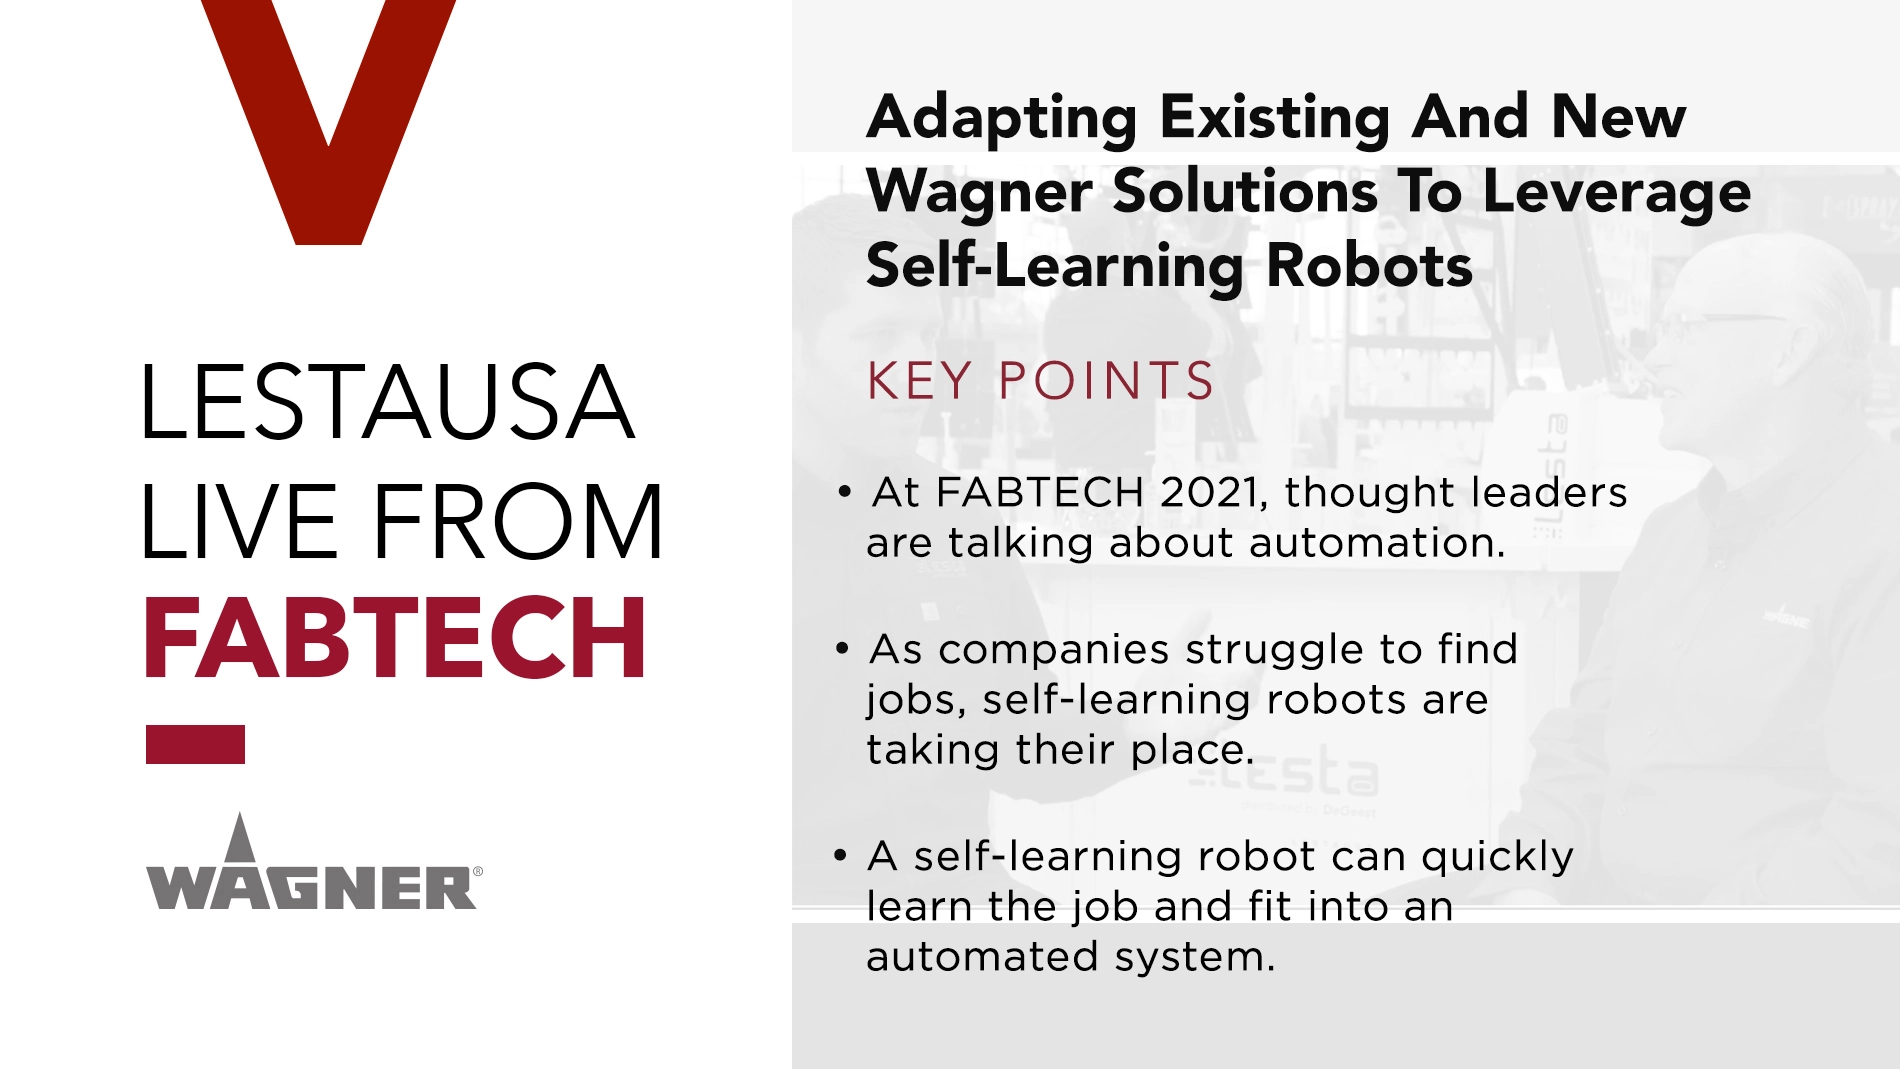 Adapting Existing and New Wagner Solutions to Leverage Self-Learning Robots